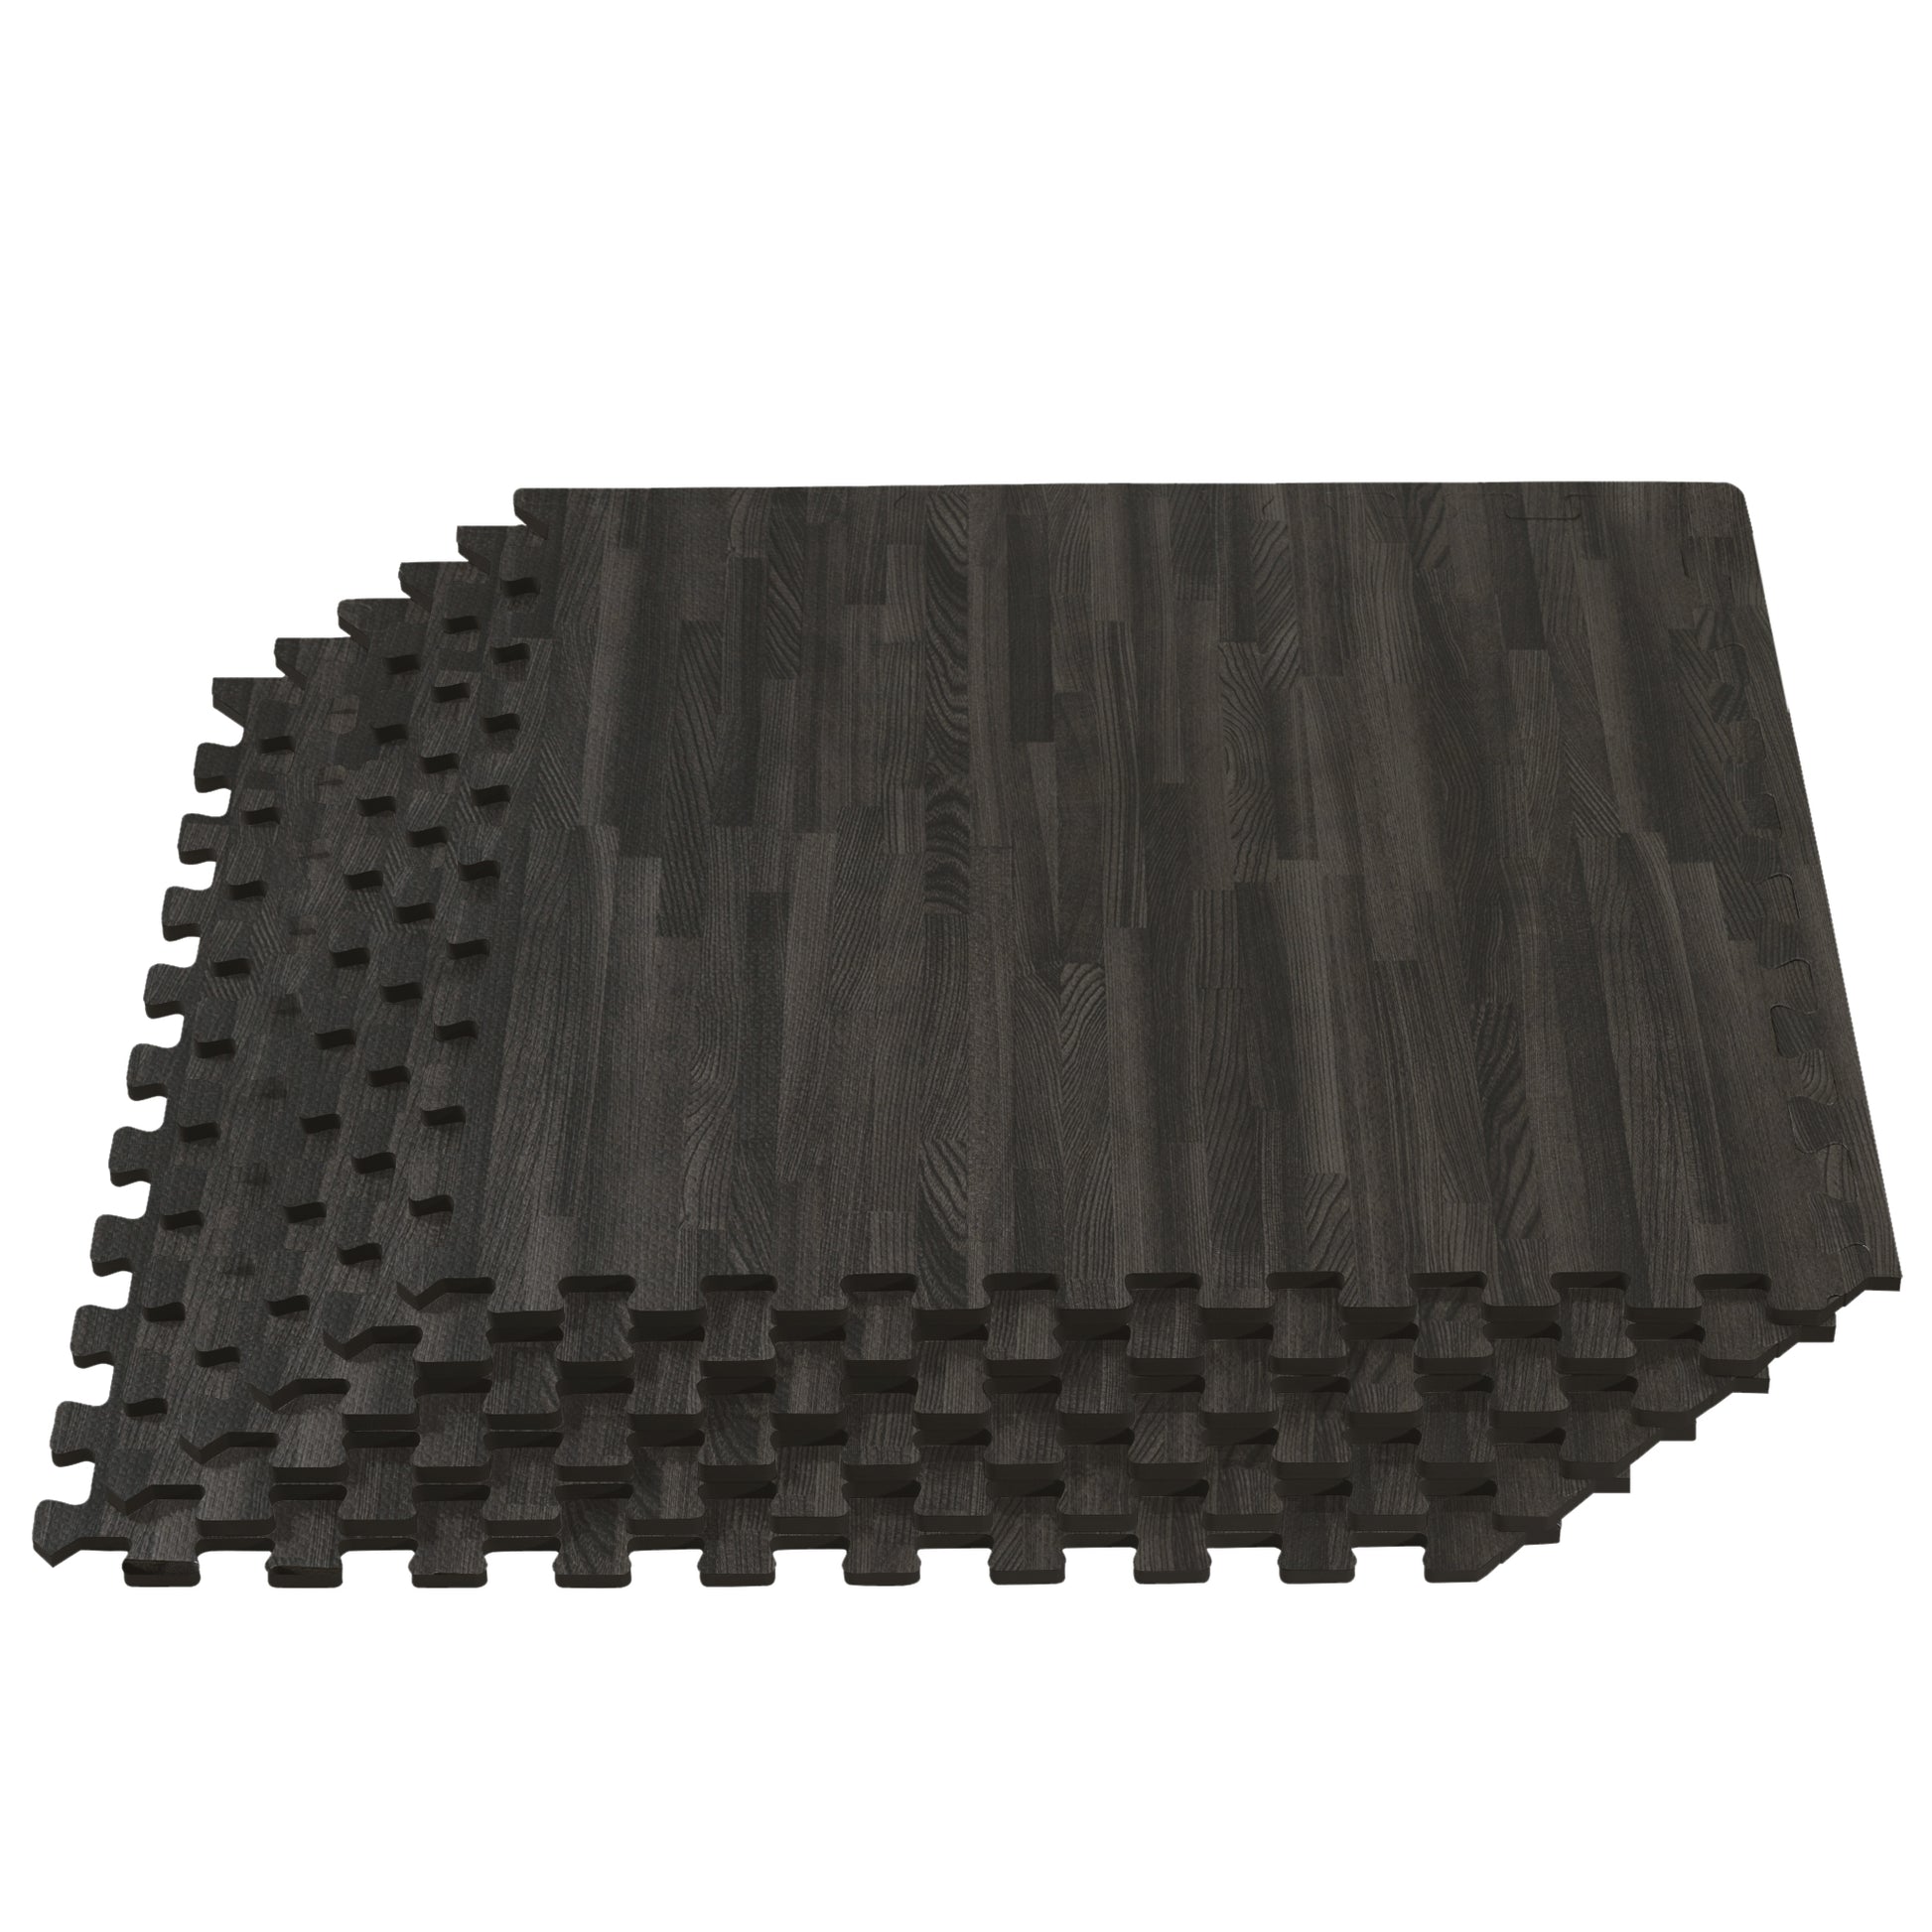 Wholesale Plastic Floor Mat Is a Useful Product You Can't Do